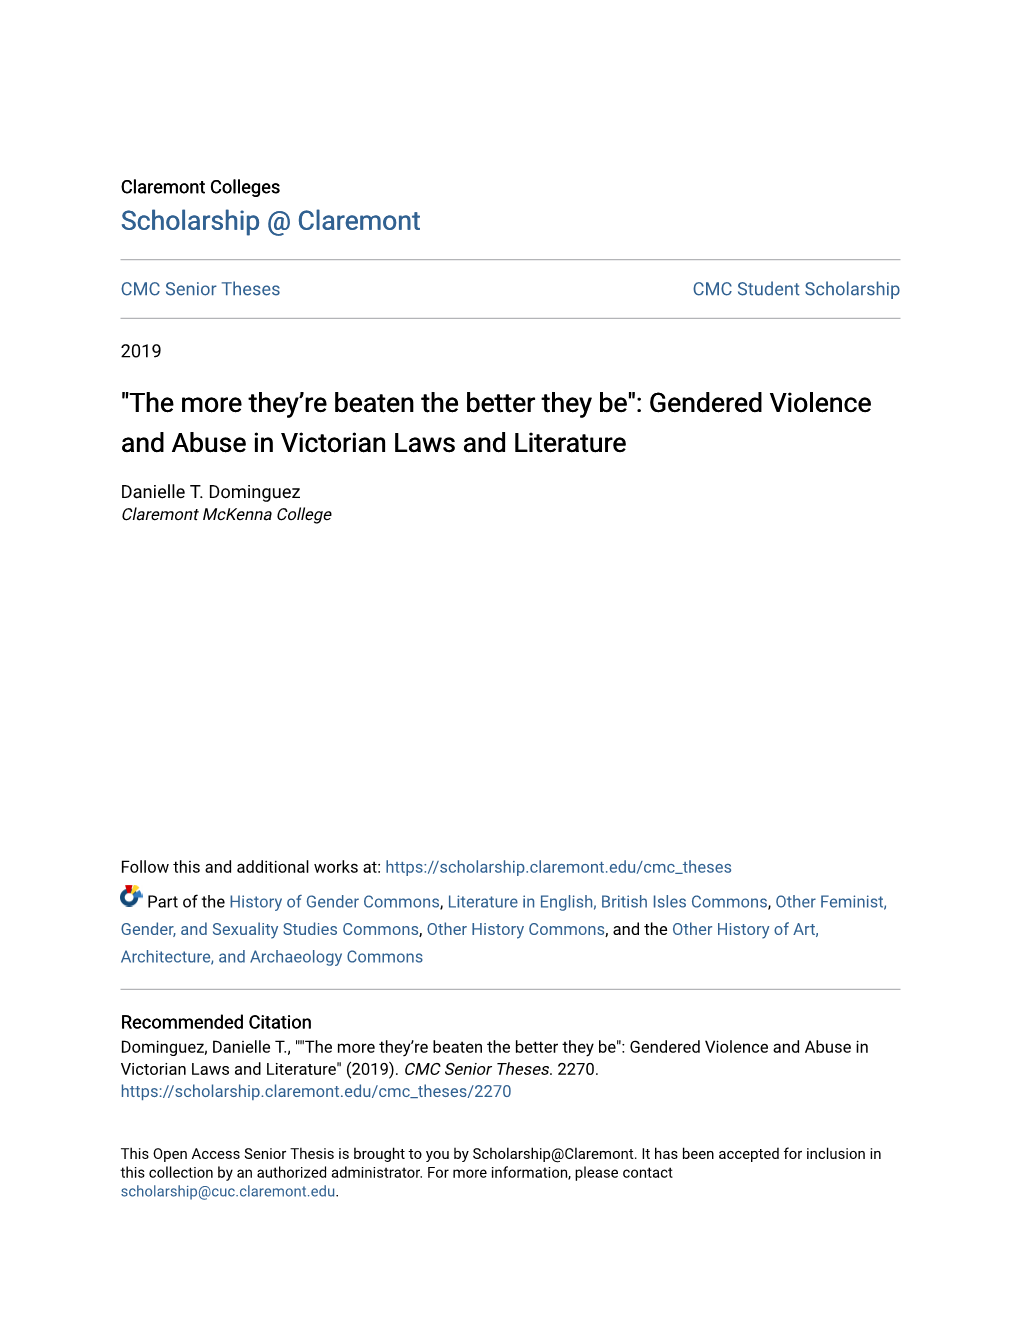 "The More They're Beaten the Better They Be": Gendered Violence And